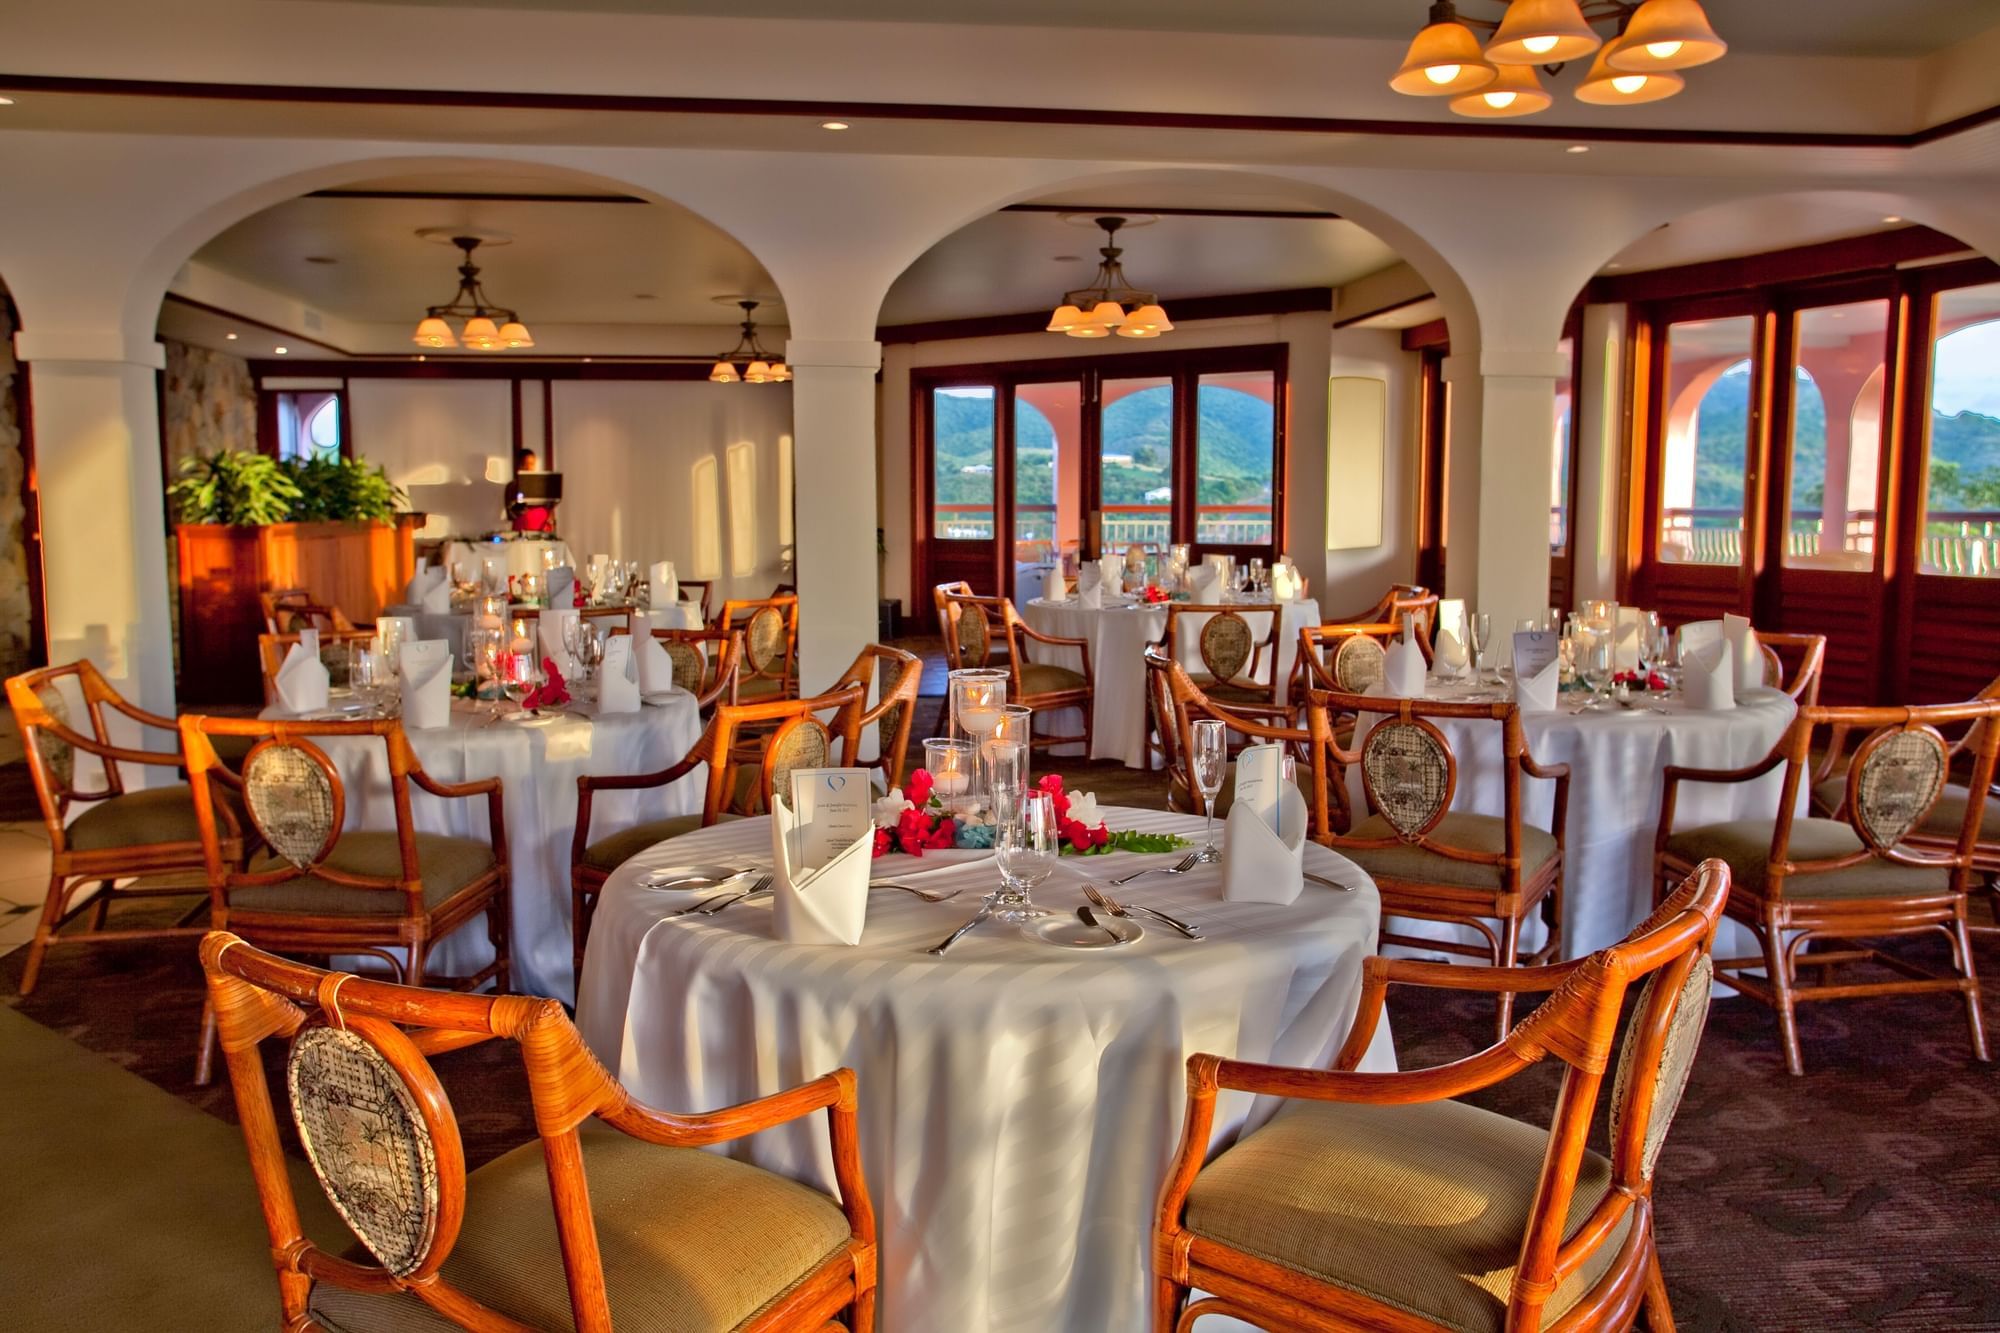 Interior of the dining area in Brass Parrot at The Buccaneer Resort St. Croix